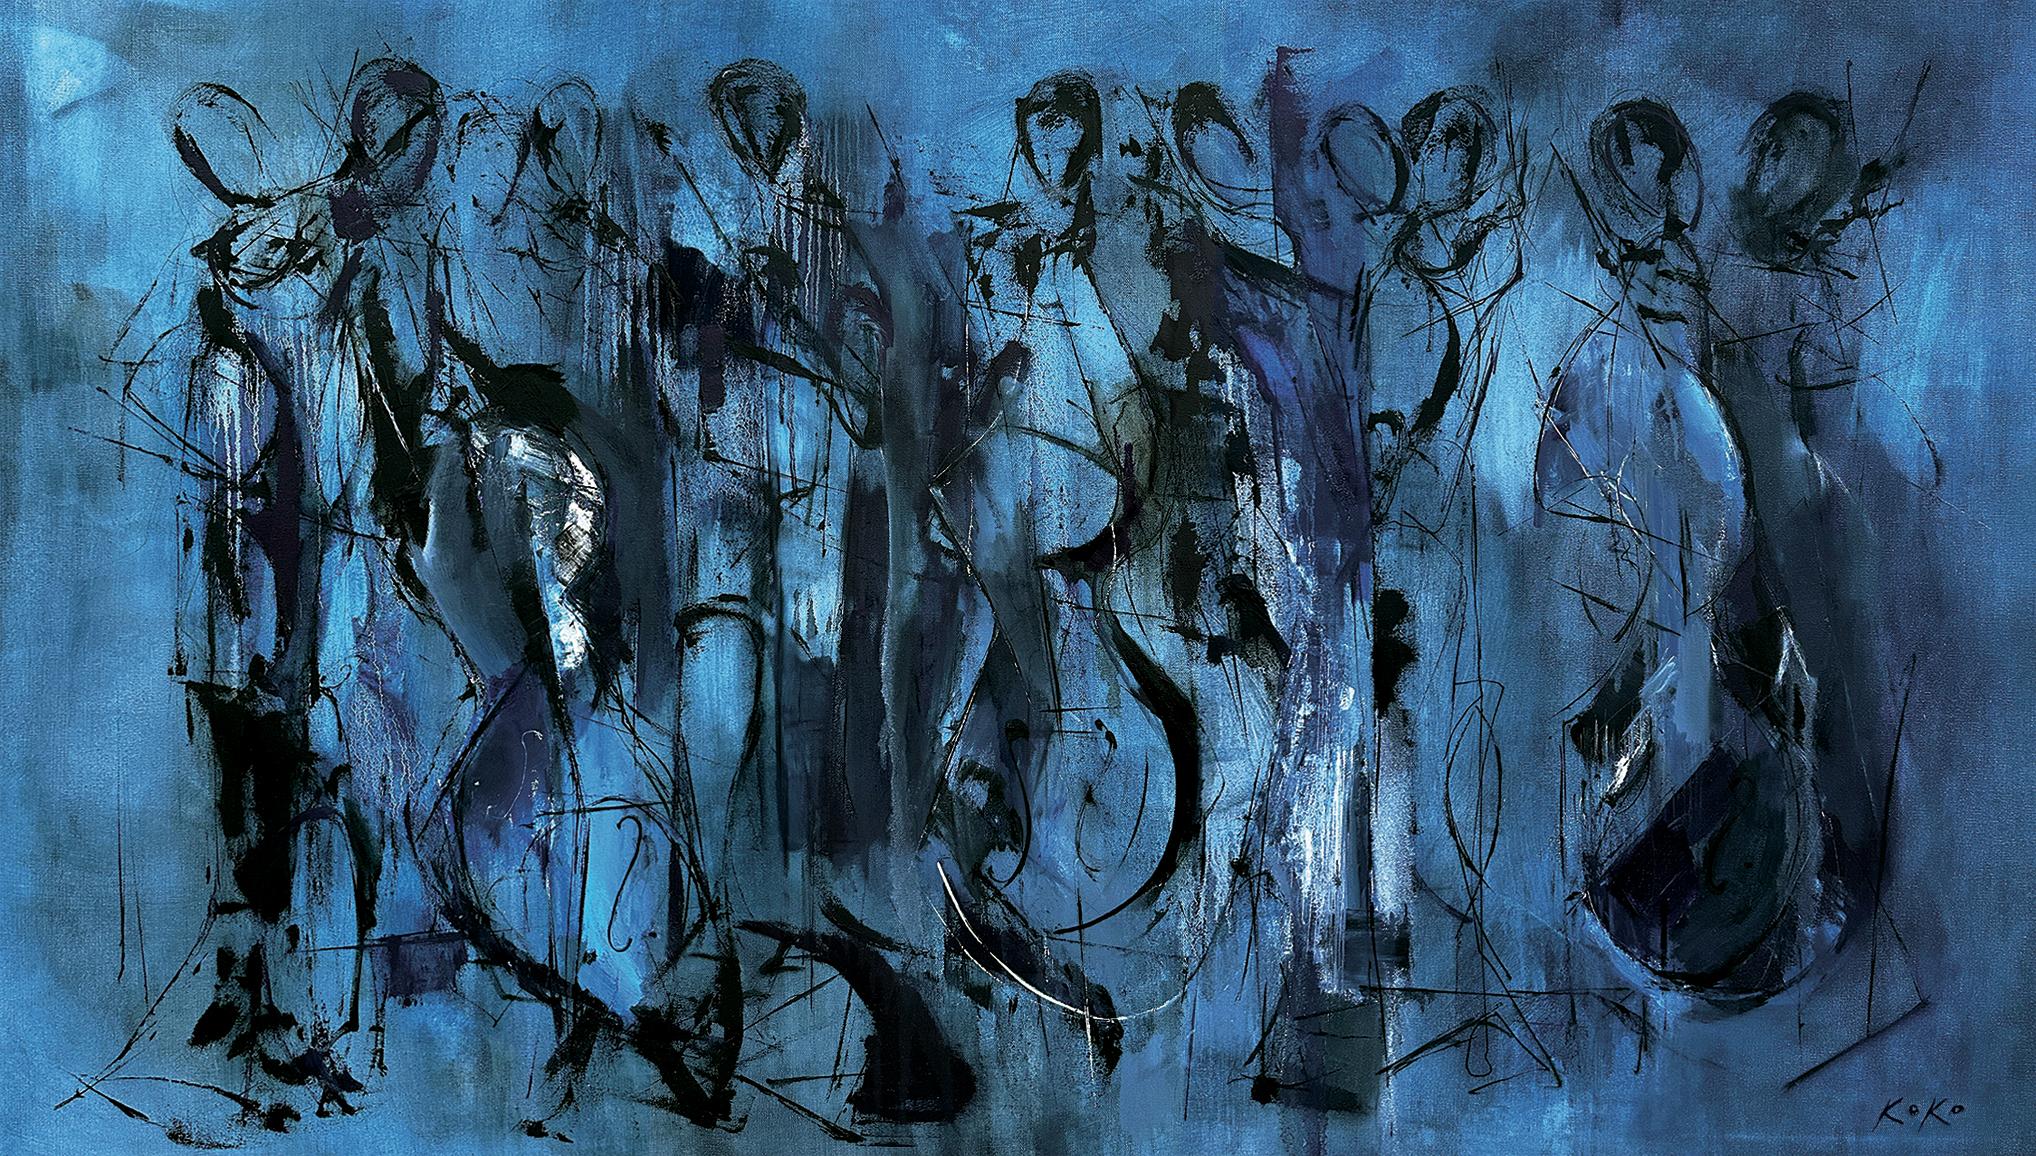 Abstract musicians oil painting, Musician Monochromatic Musicians, In Deep Blue.